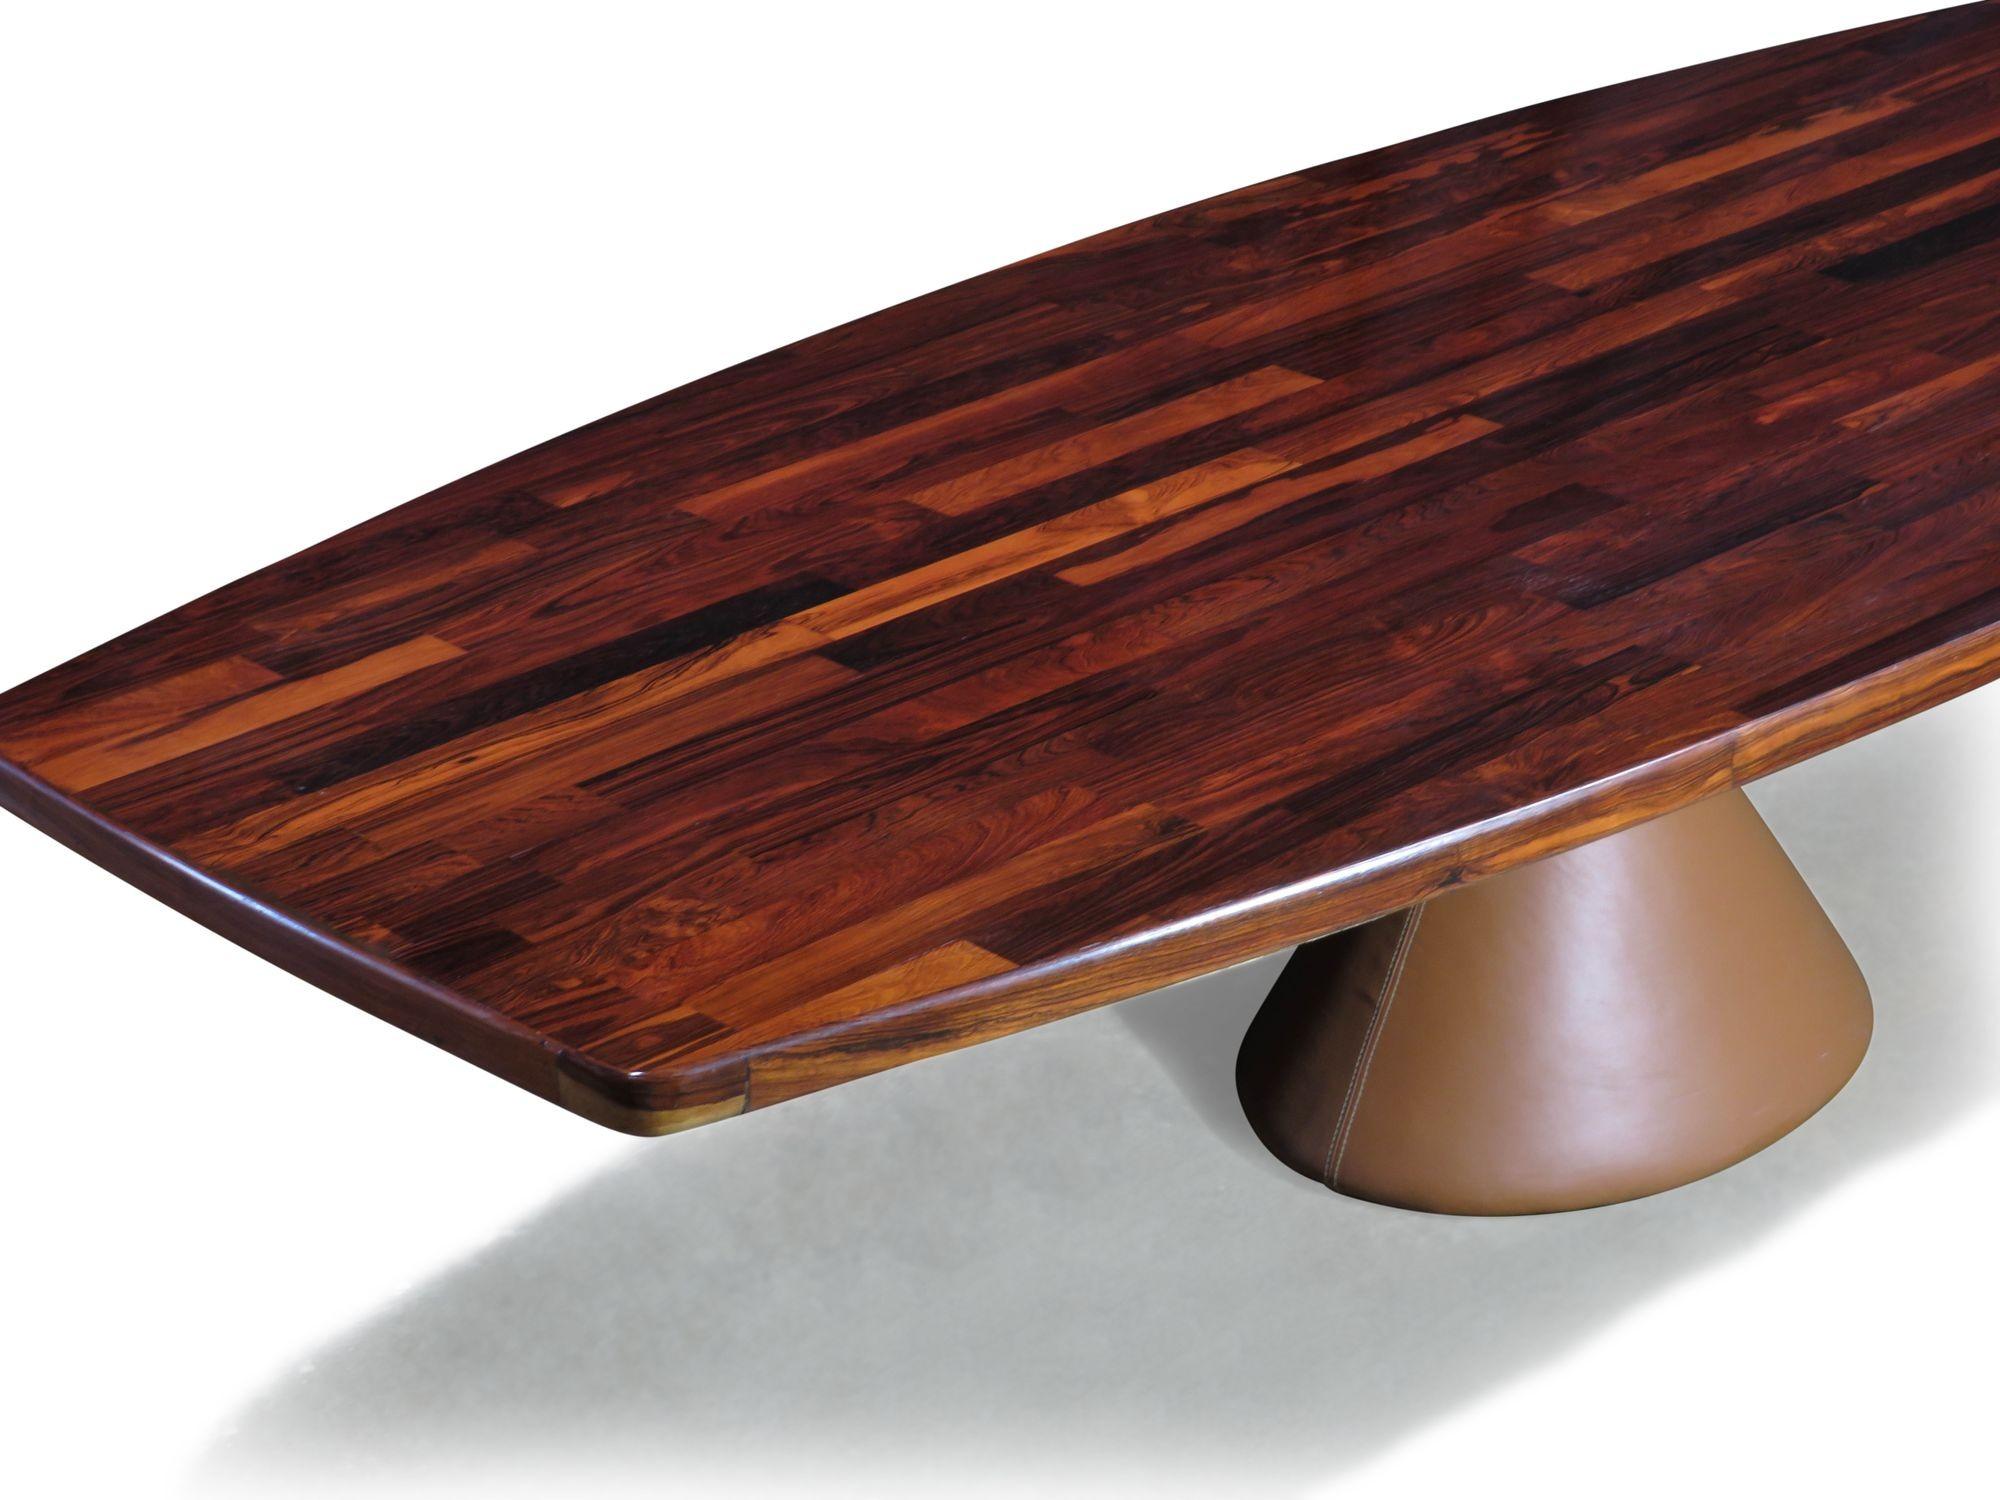 Iconic Guanabara table designed by Jorge Zalszupin for L'atelier, 1959. Features an impressive boat-shaped rosewood top over a massive concrete base covered in a saddle leather. The patchwork top has a well balanced composition of light and dark